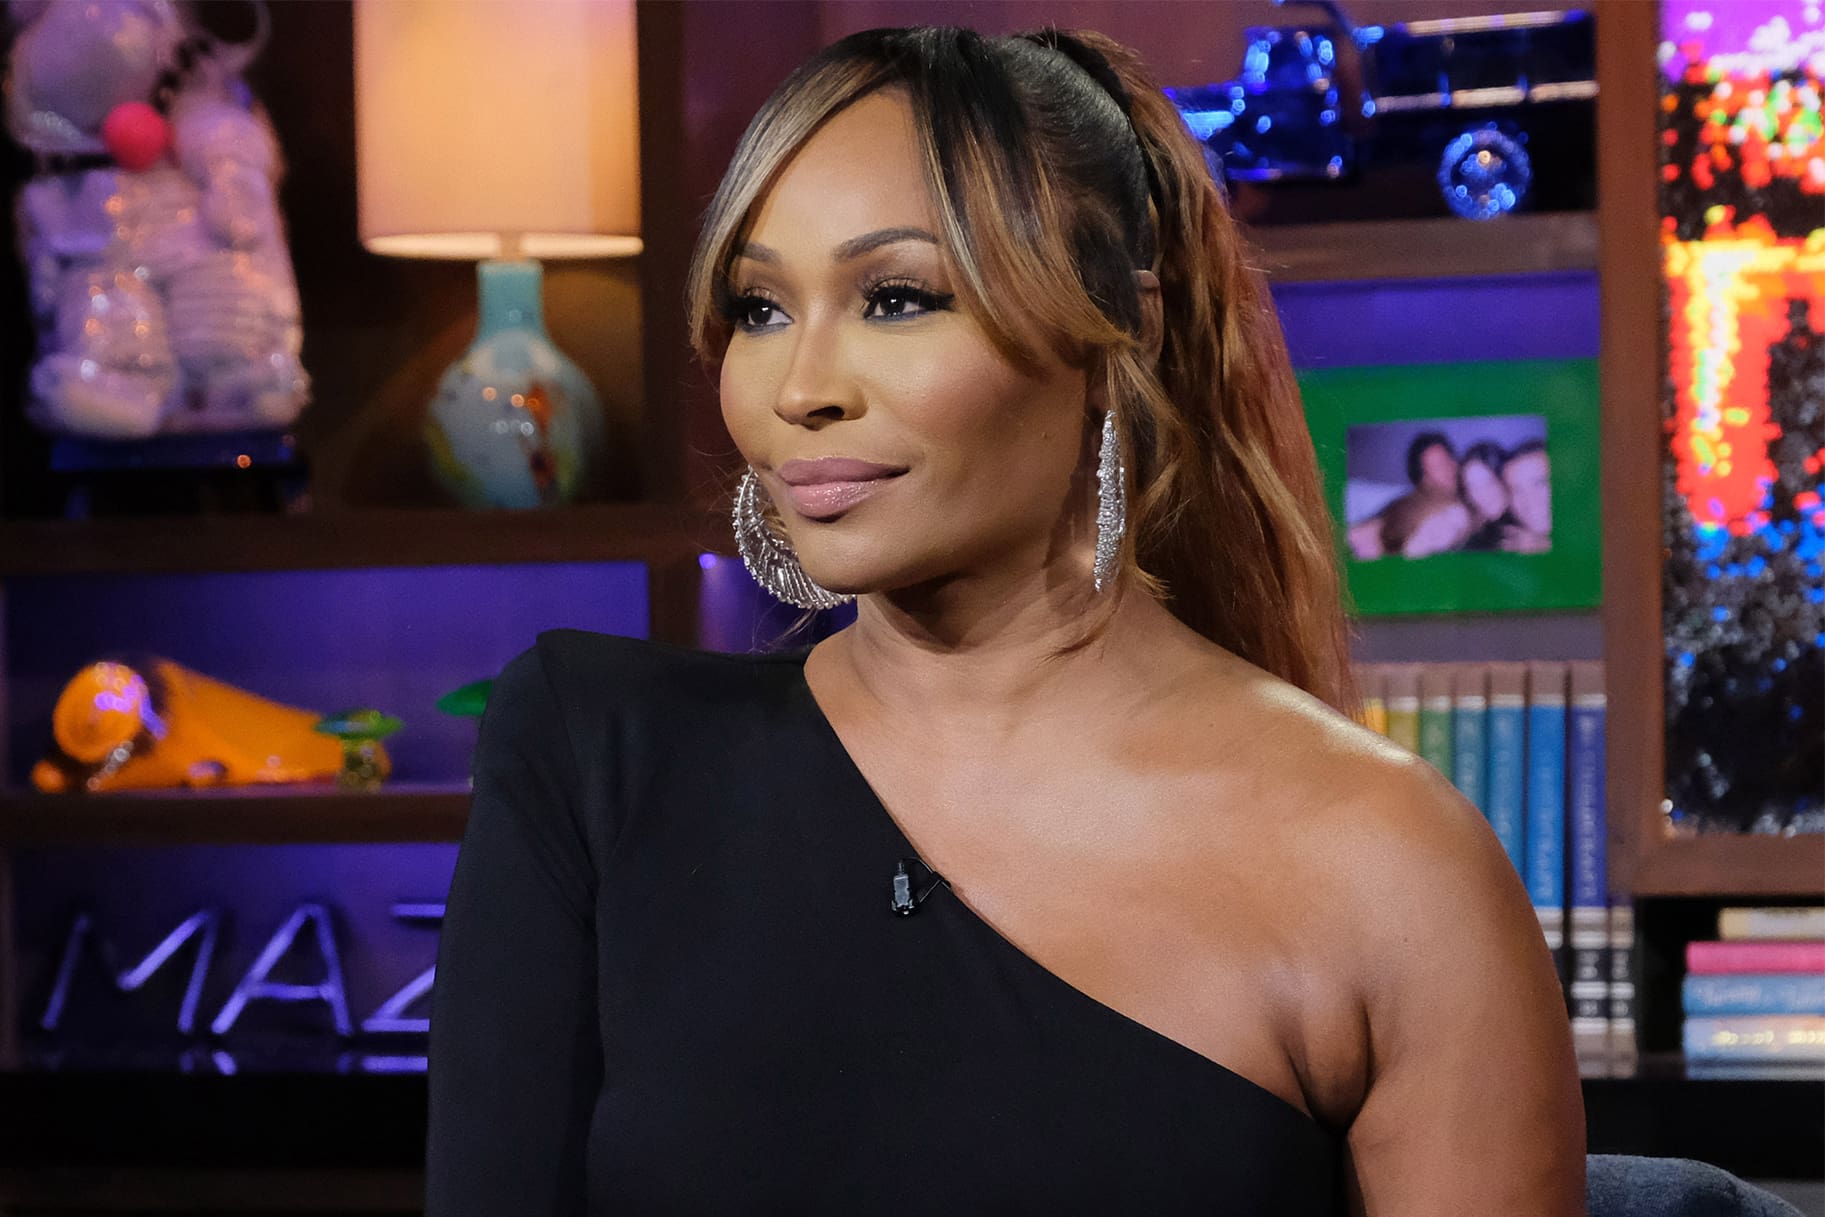 Cynthia Bailey Flaunted An Amazing Look On WWHL - See The Pics